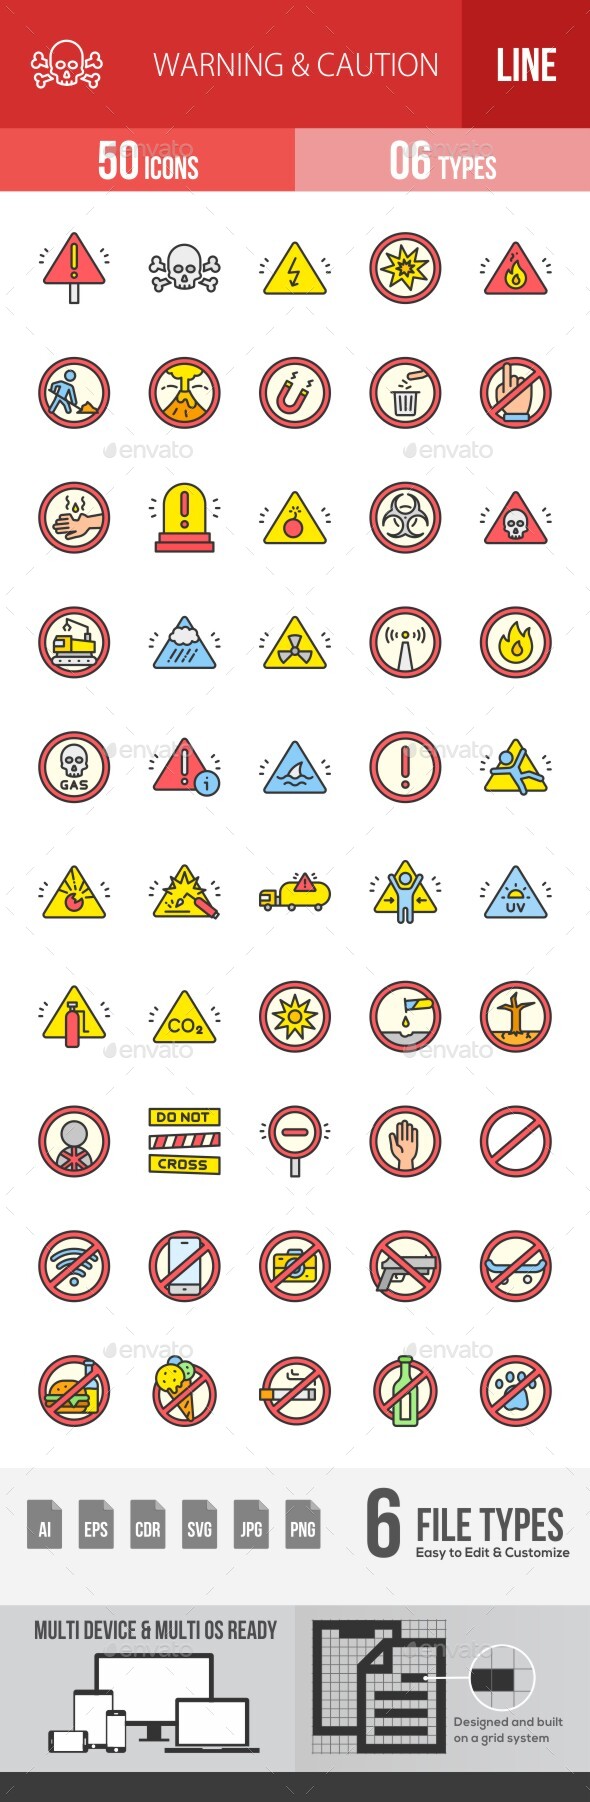 Warning & Caution Filled Line Icons